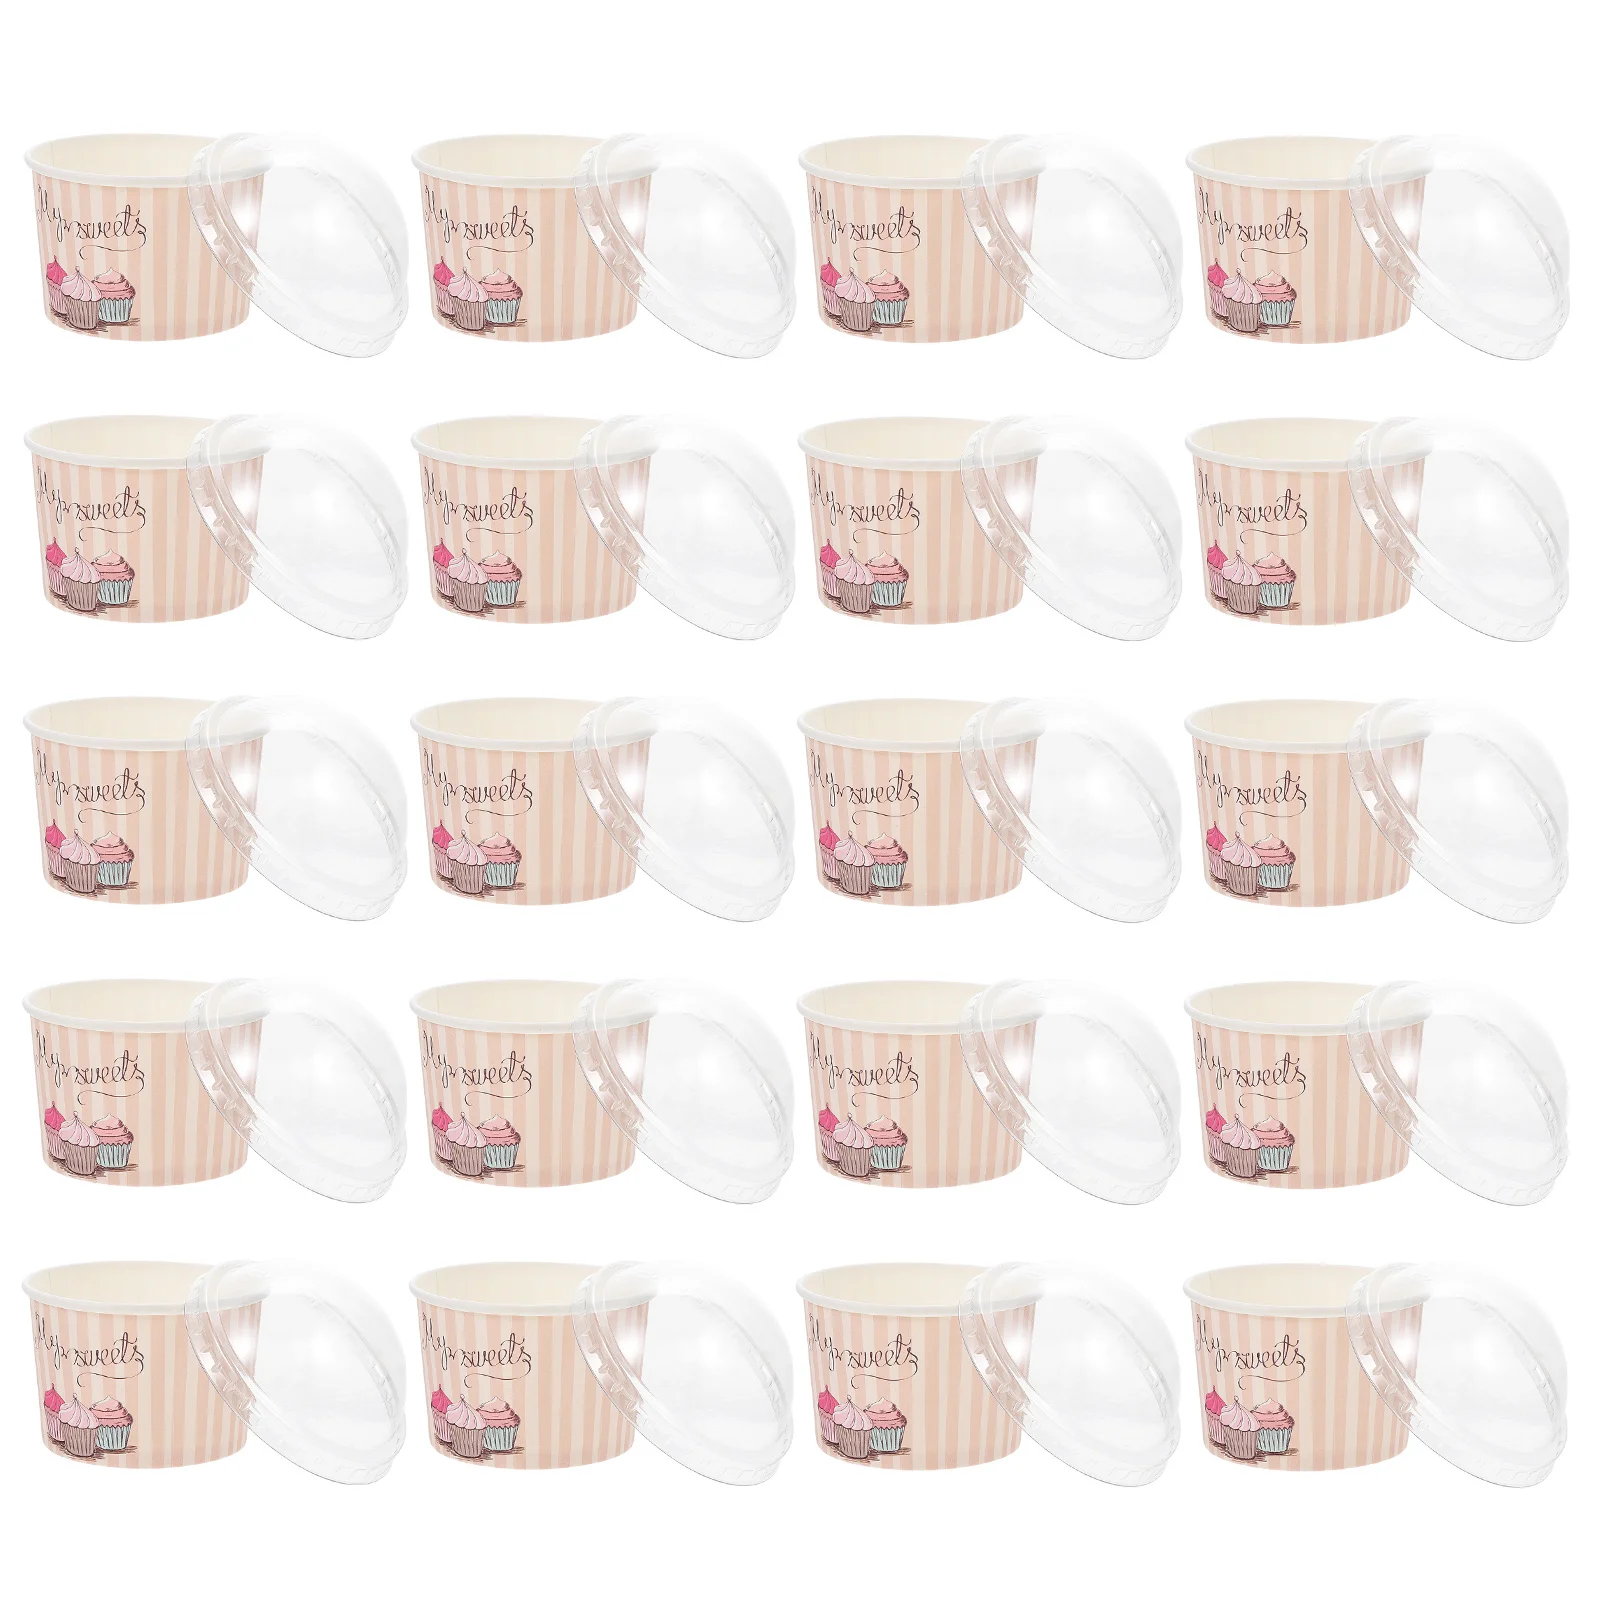 

Bowls Pudding Paper Sets Cream Ice Cups Yogurt Milk Cake Disposable Lidded Cake Cream With 50 Paper Bowls Bowl Ice Cup Lid